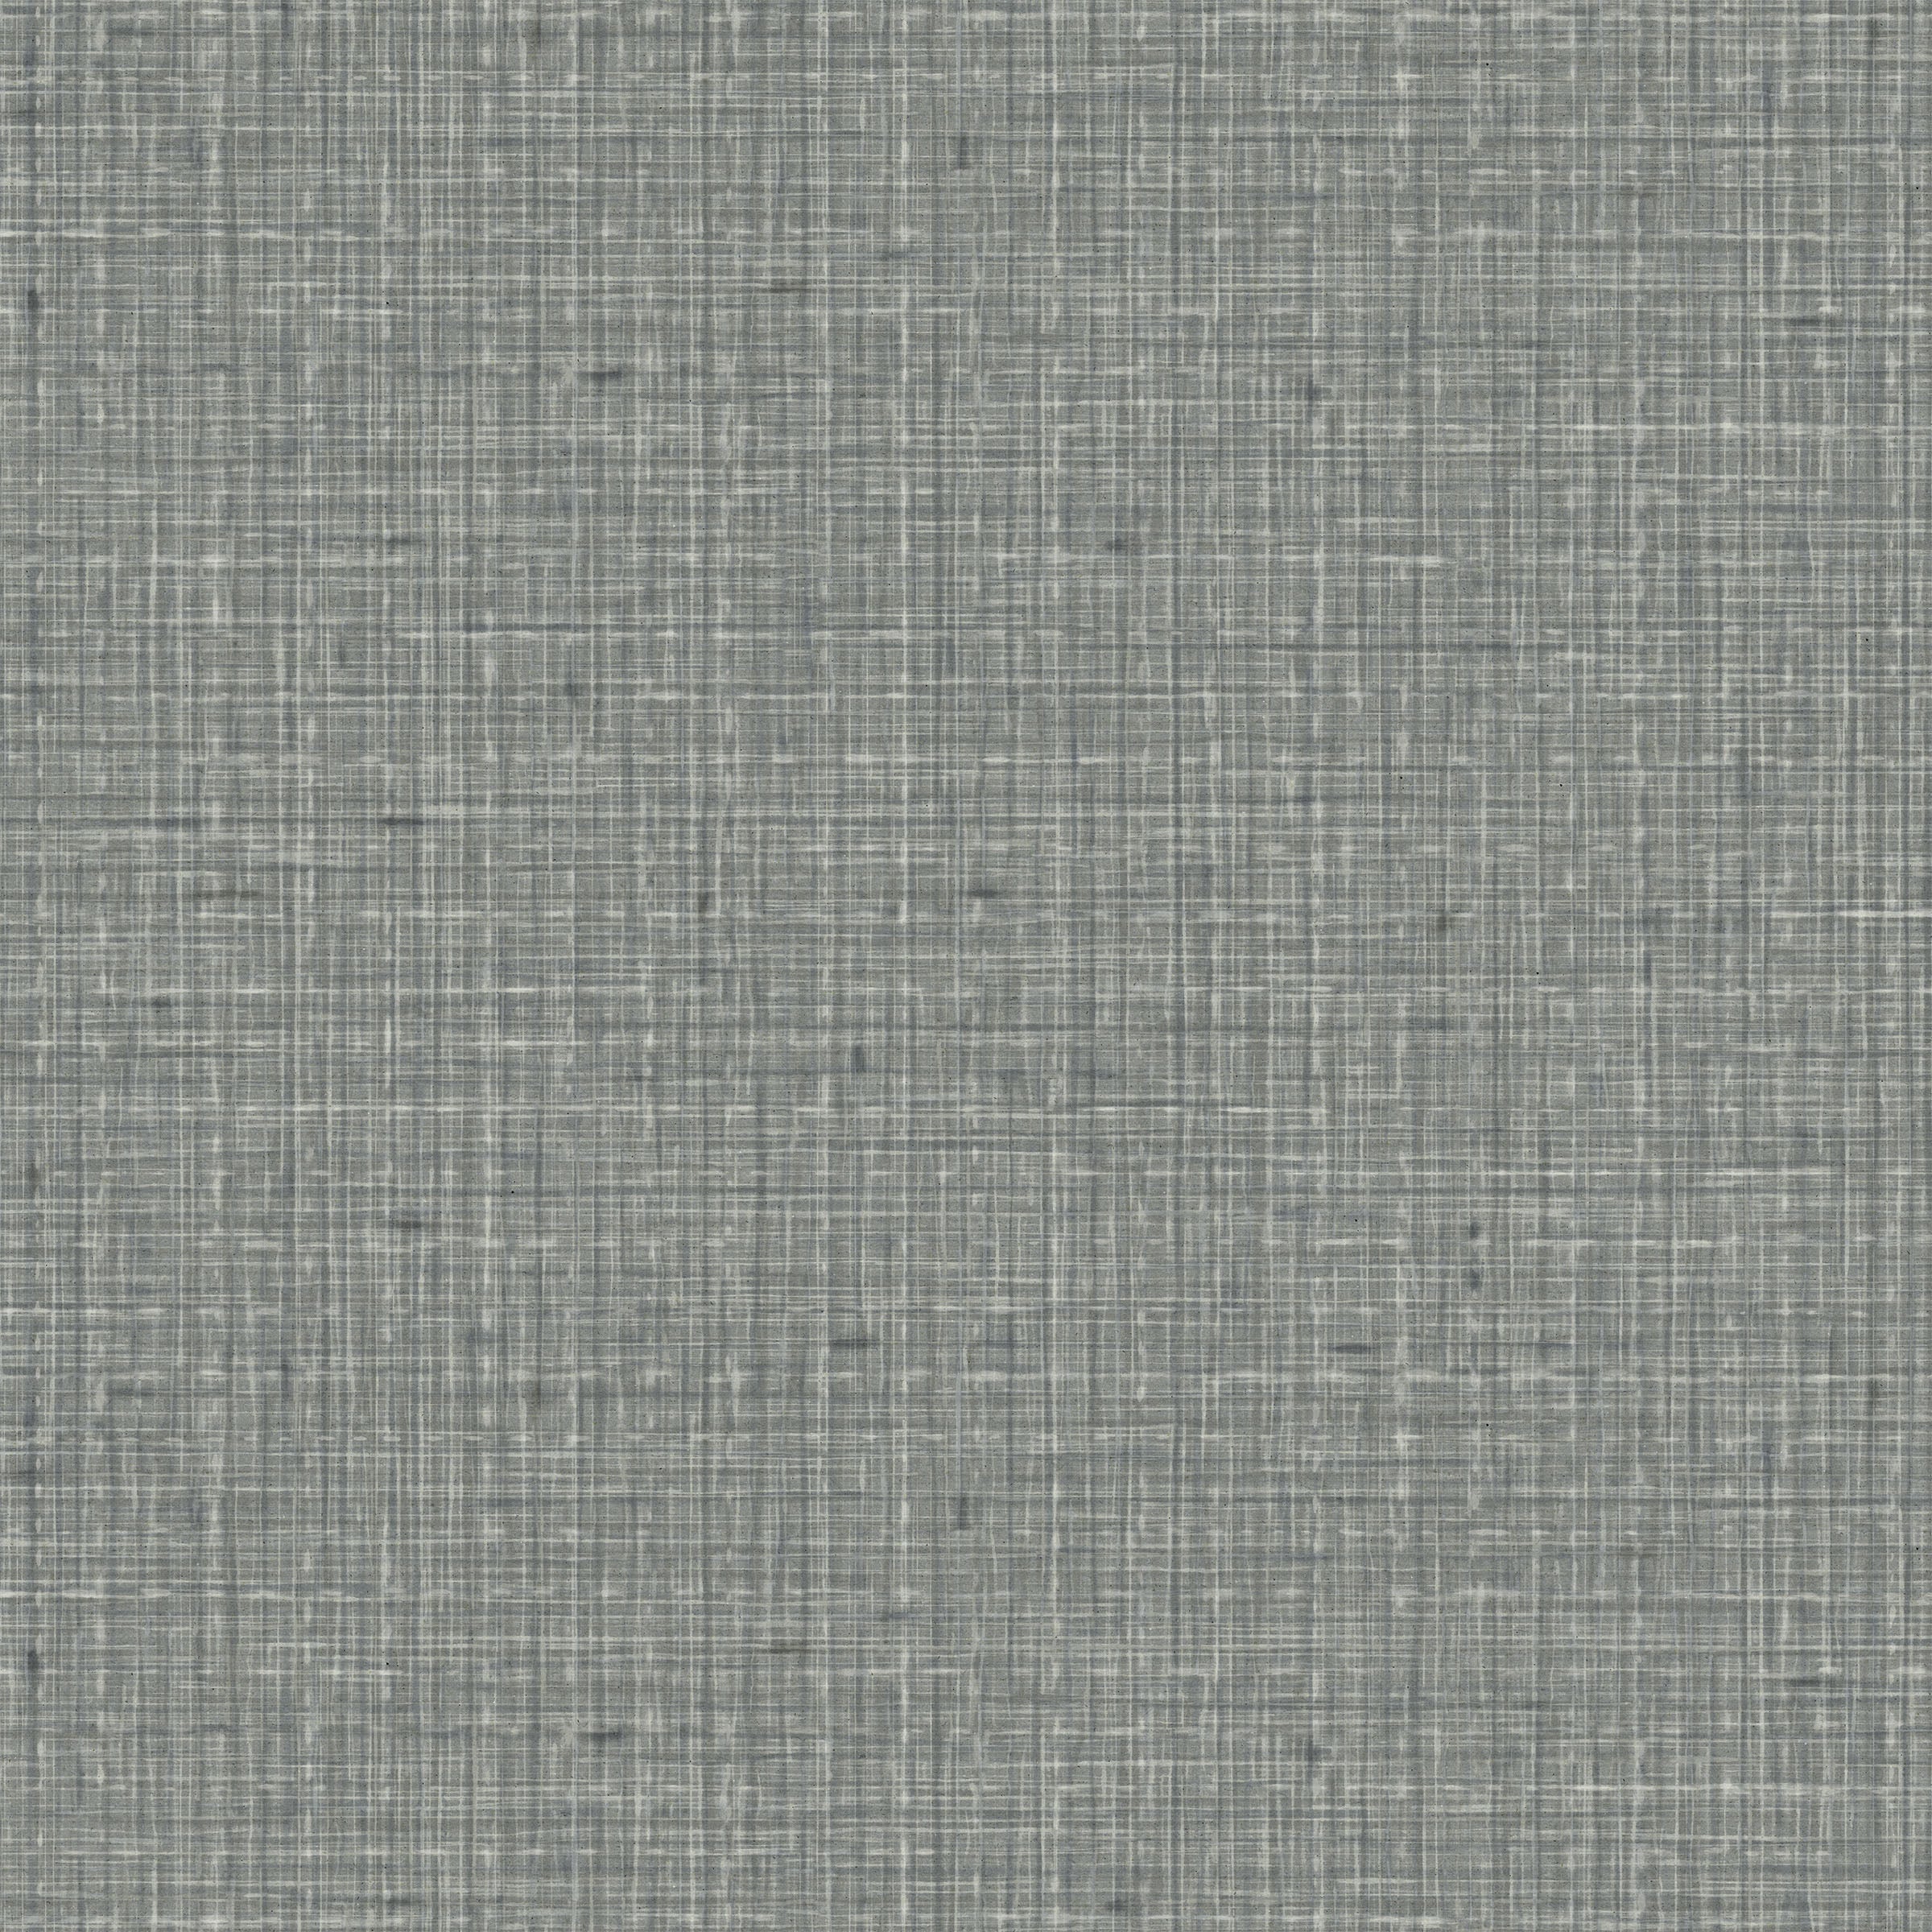 Detail of fabric in a textured tweed pattern in shades of blue-gray.